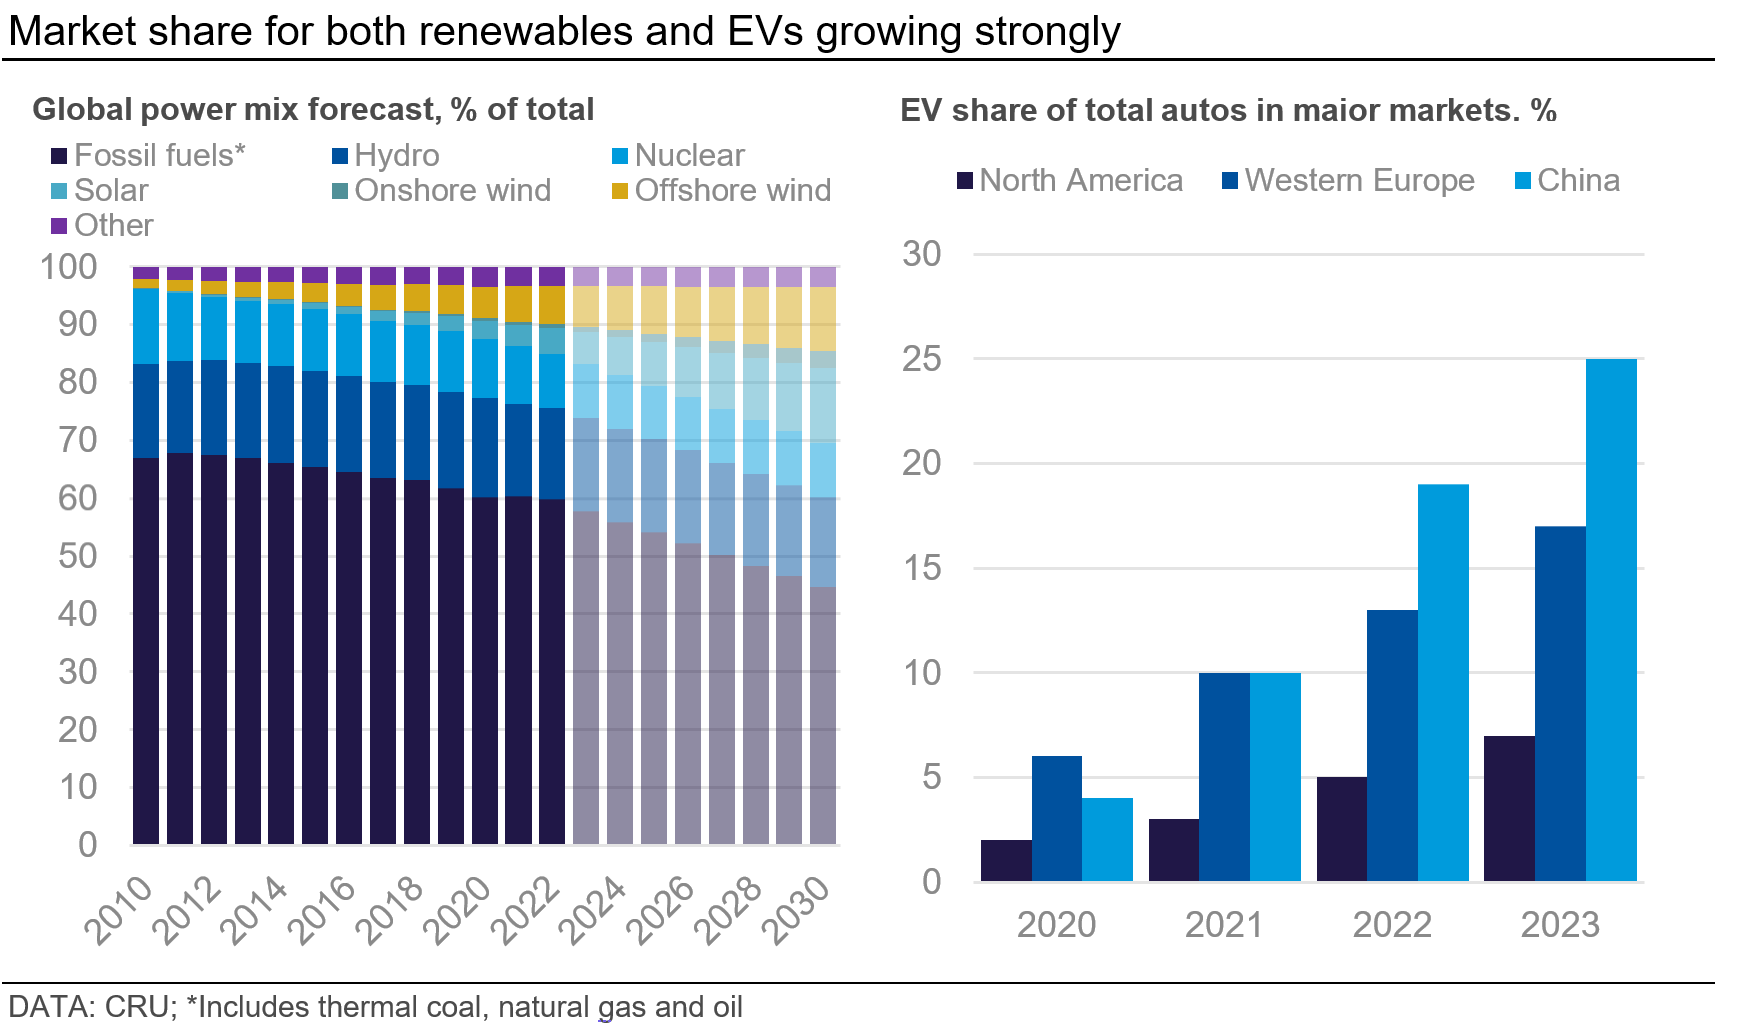 Graph showing market share for both renewables and EVs growing strongly